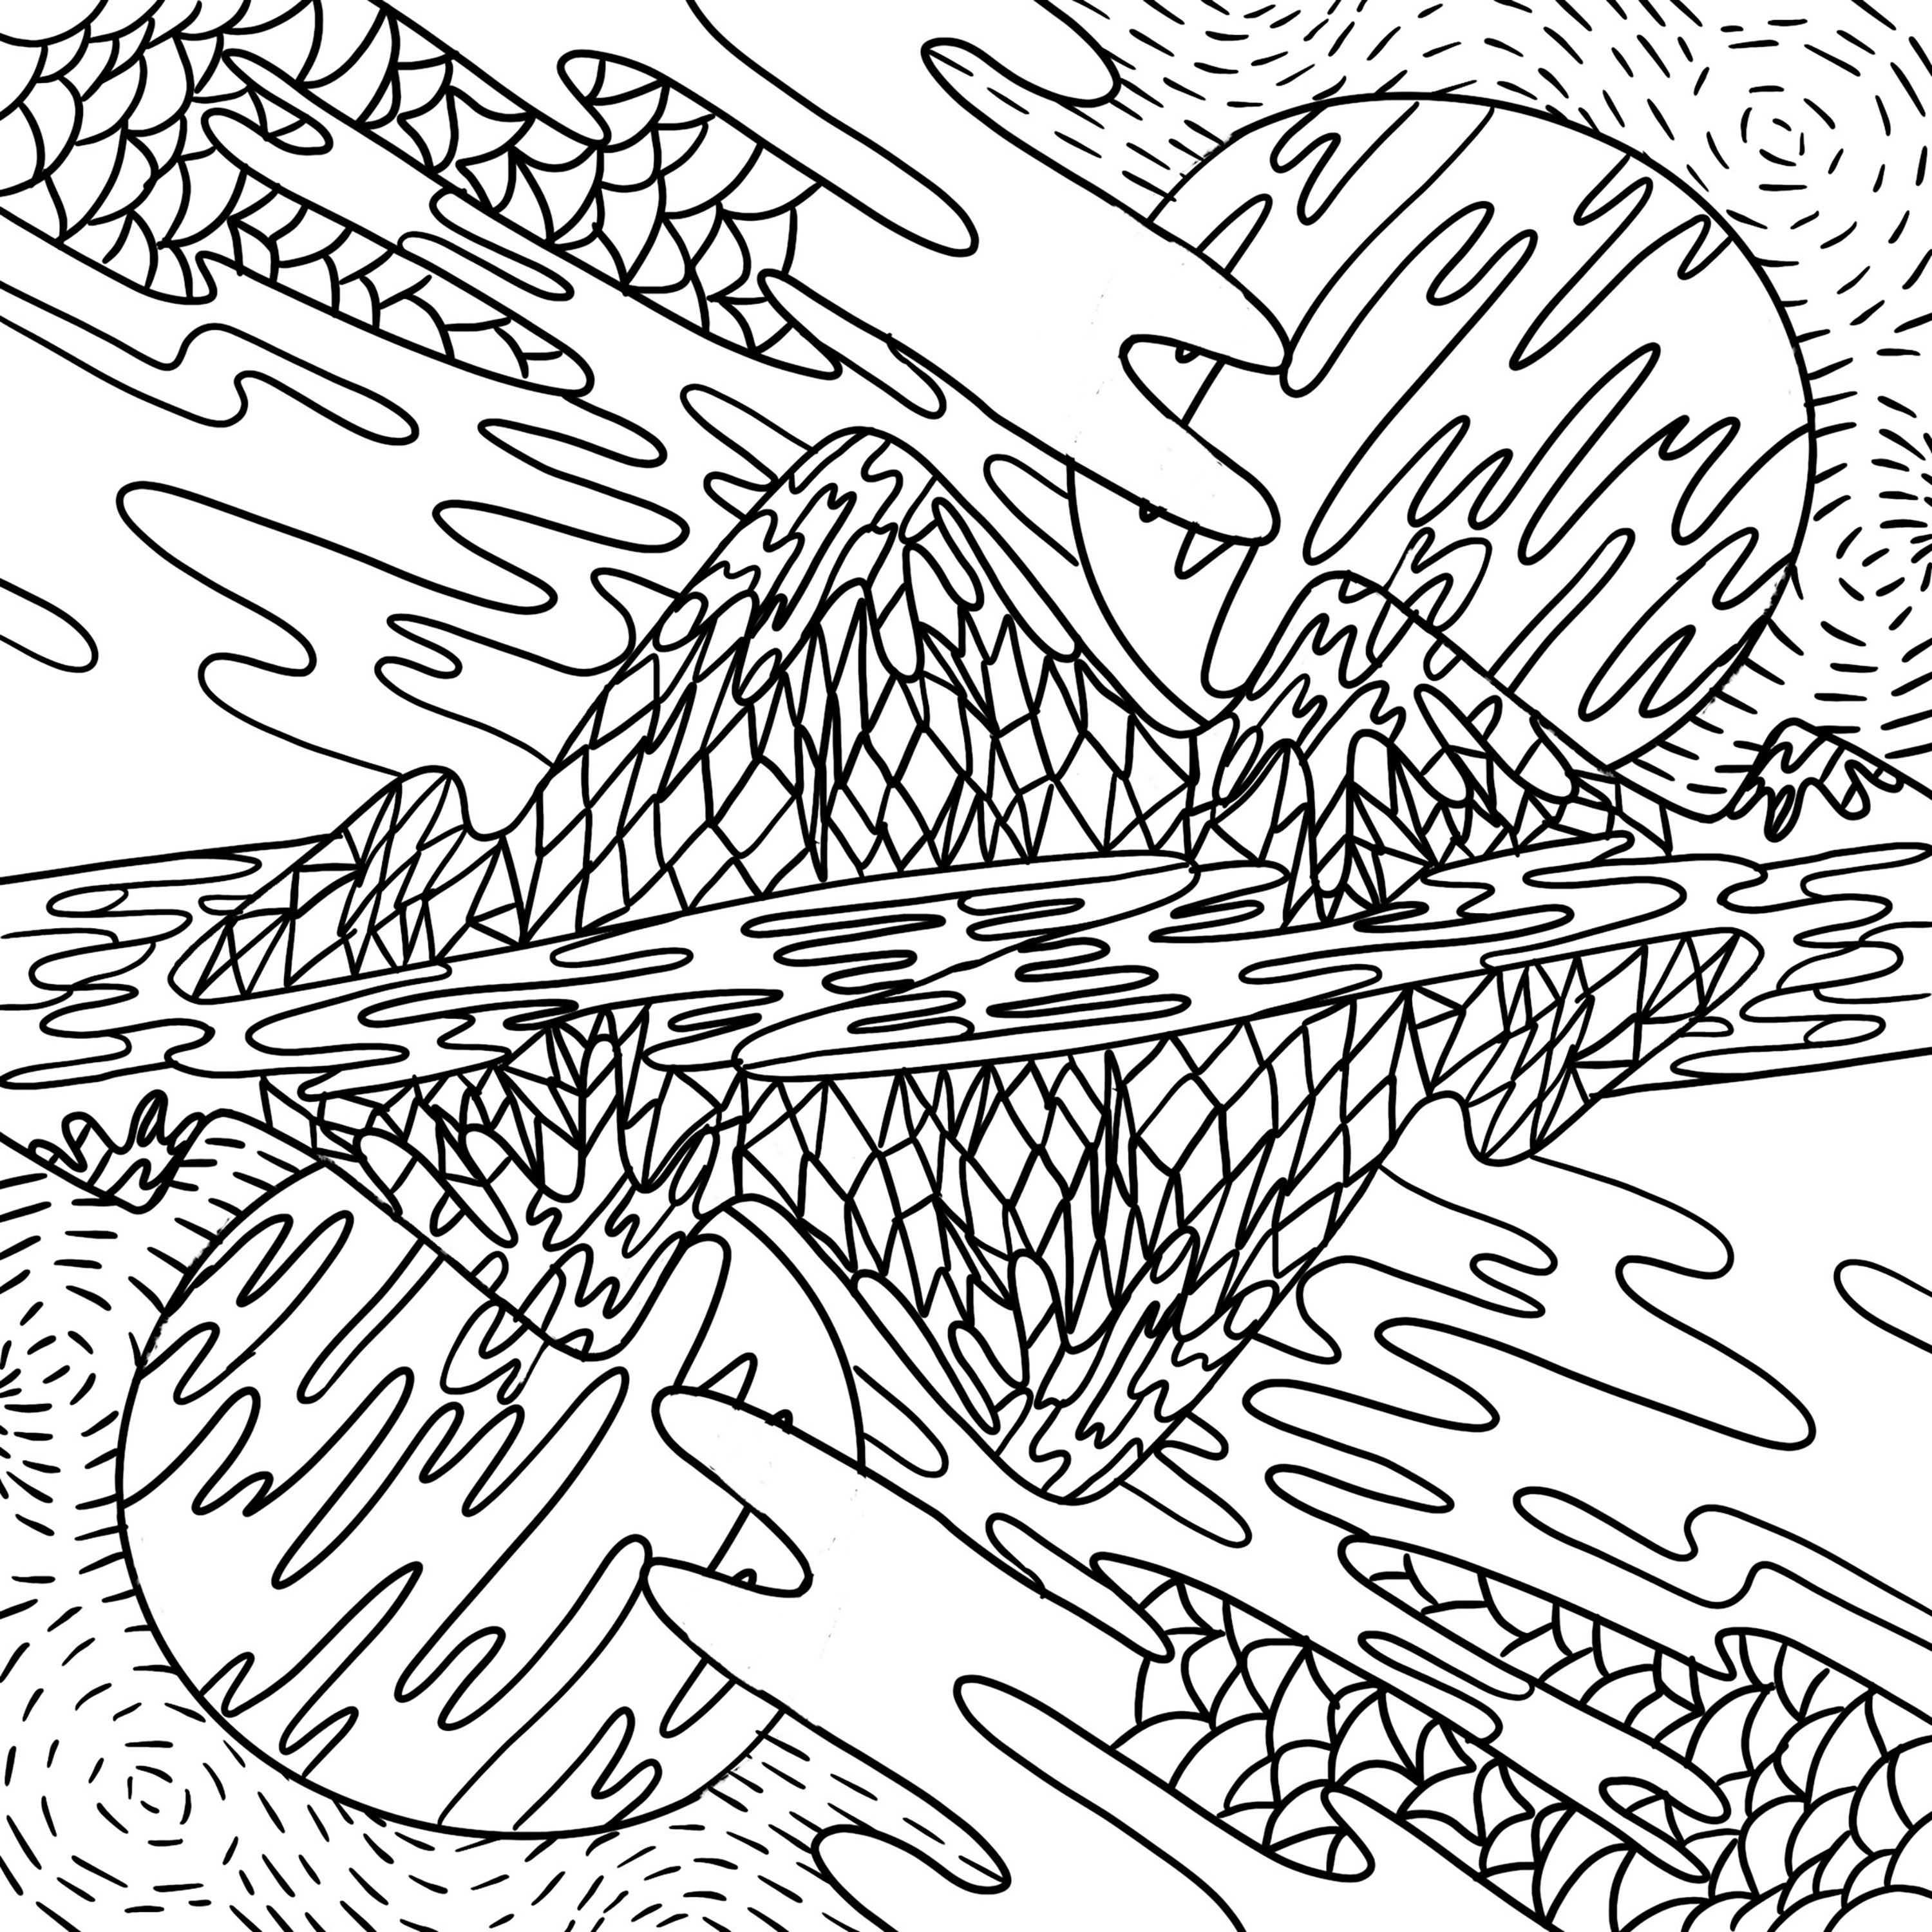 Coloring pages. coloring book for adults. coloring meditative magic mountain landscape  pictures. freehand anti stress sketch with doodle and zentangle elements